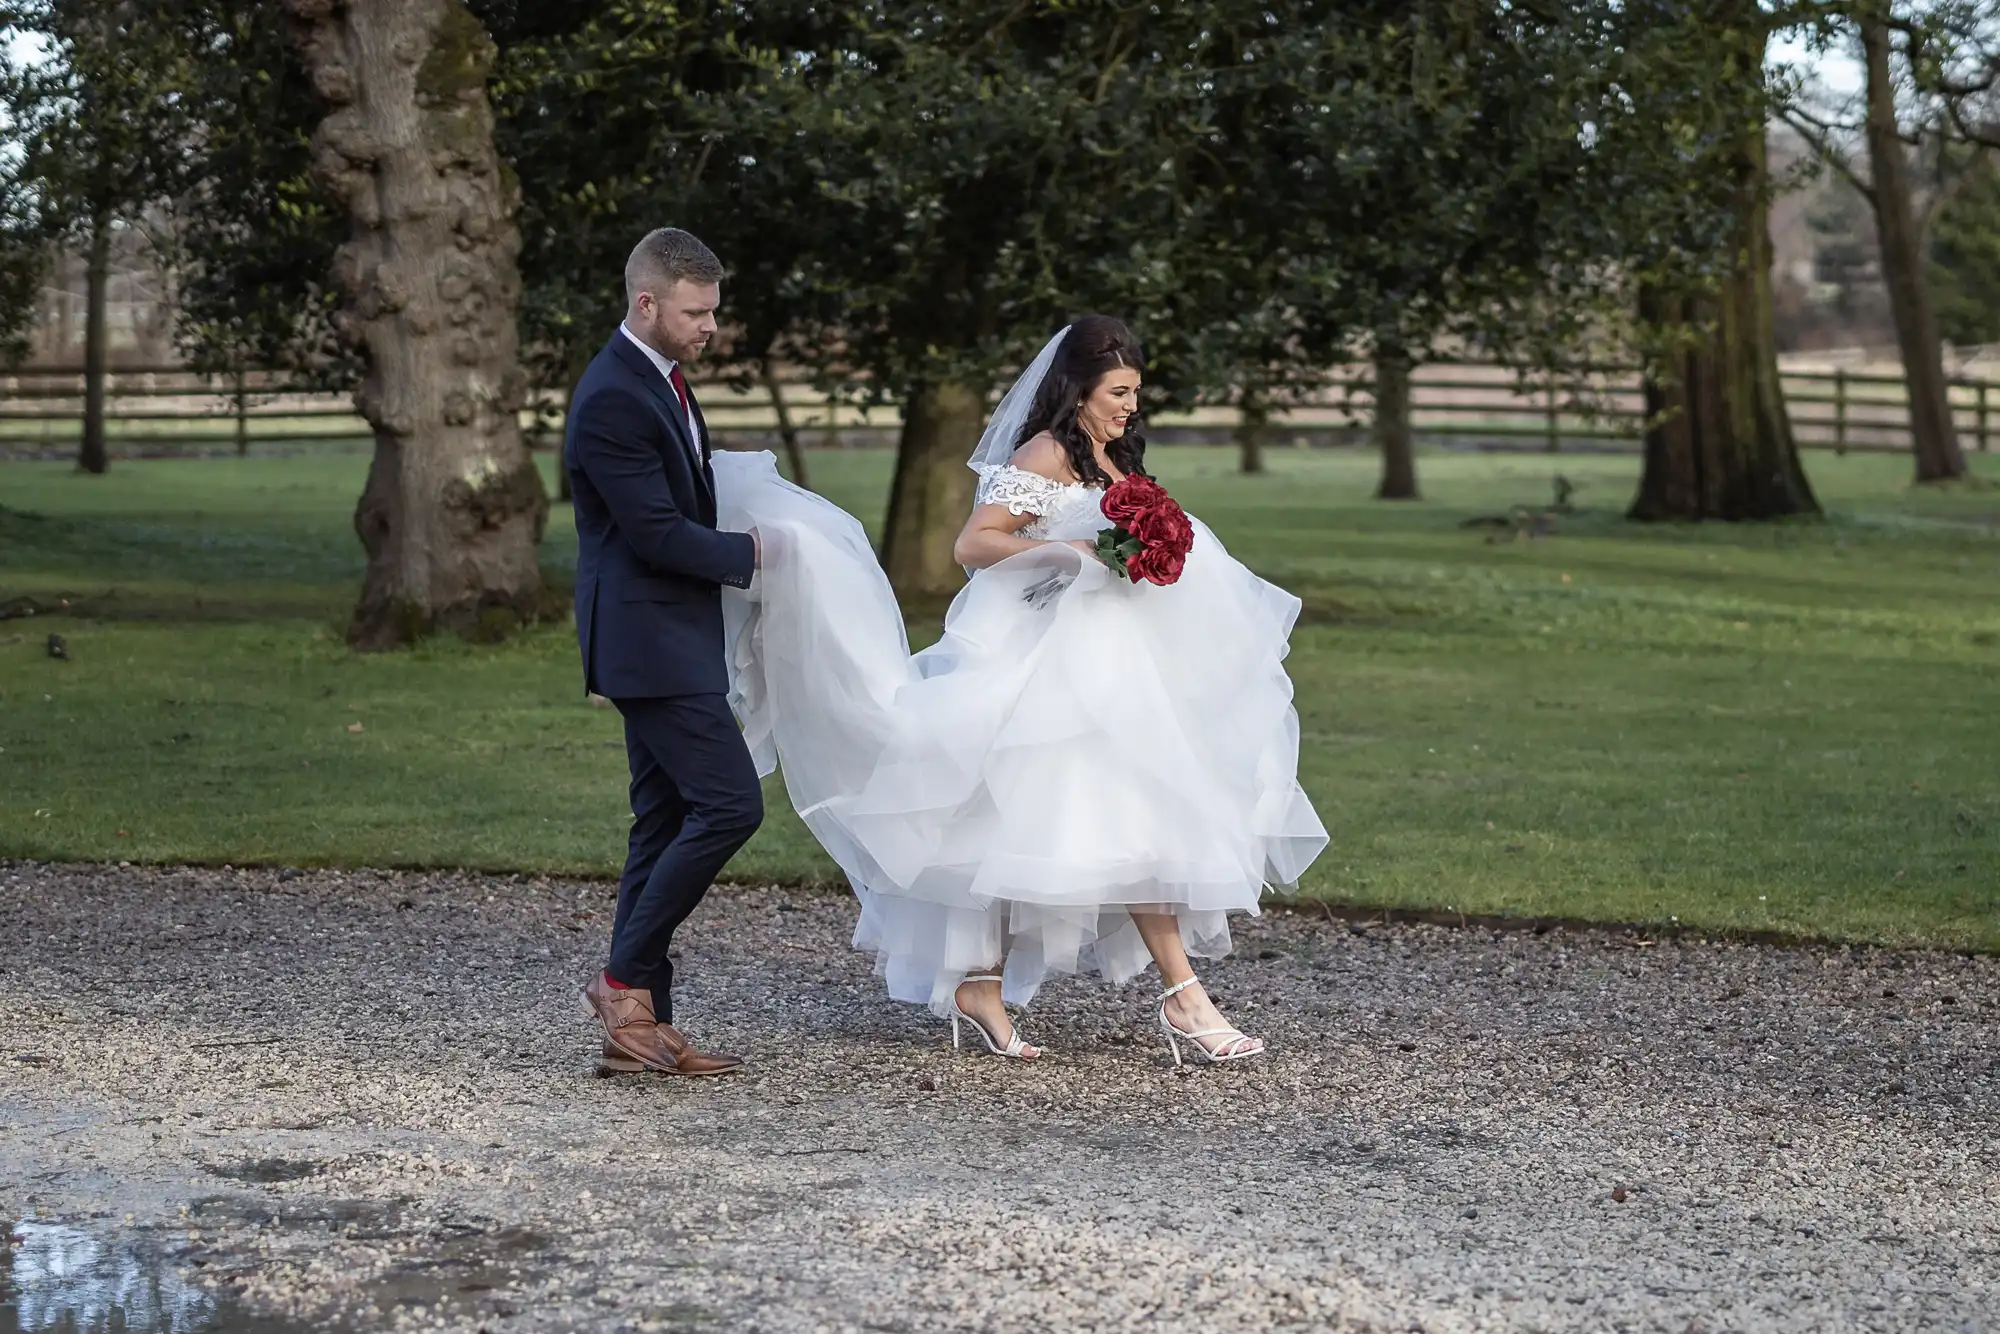 A bride and groom walk outside on a gravel path. The groom holds up the bride's white dress as she holds a bouquet of red flowers. Trees and fencing are visible in the background.